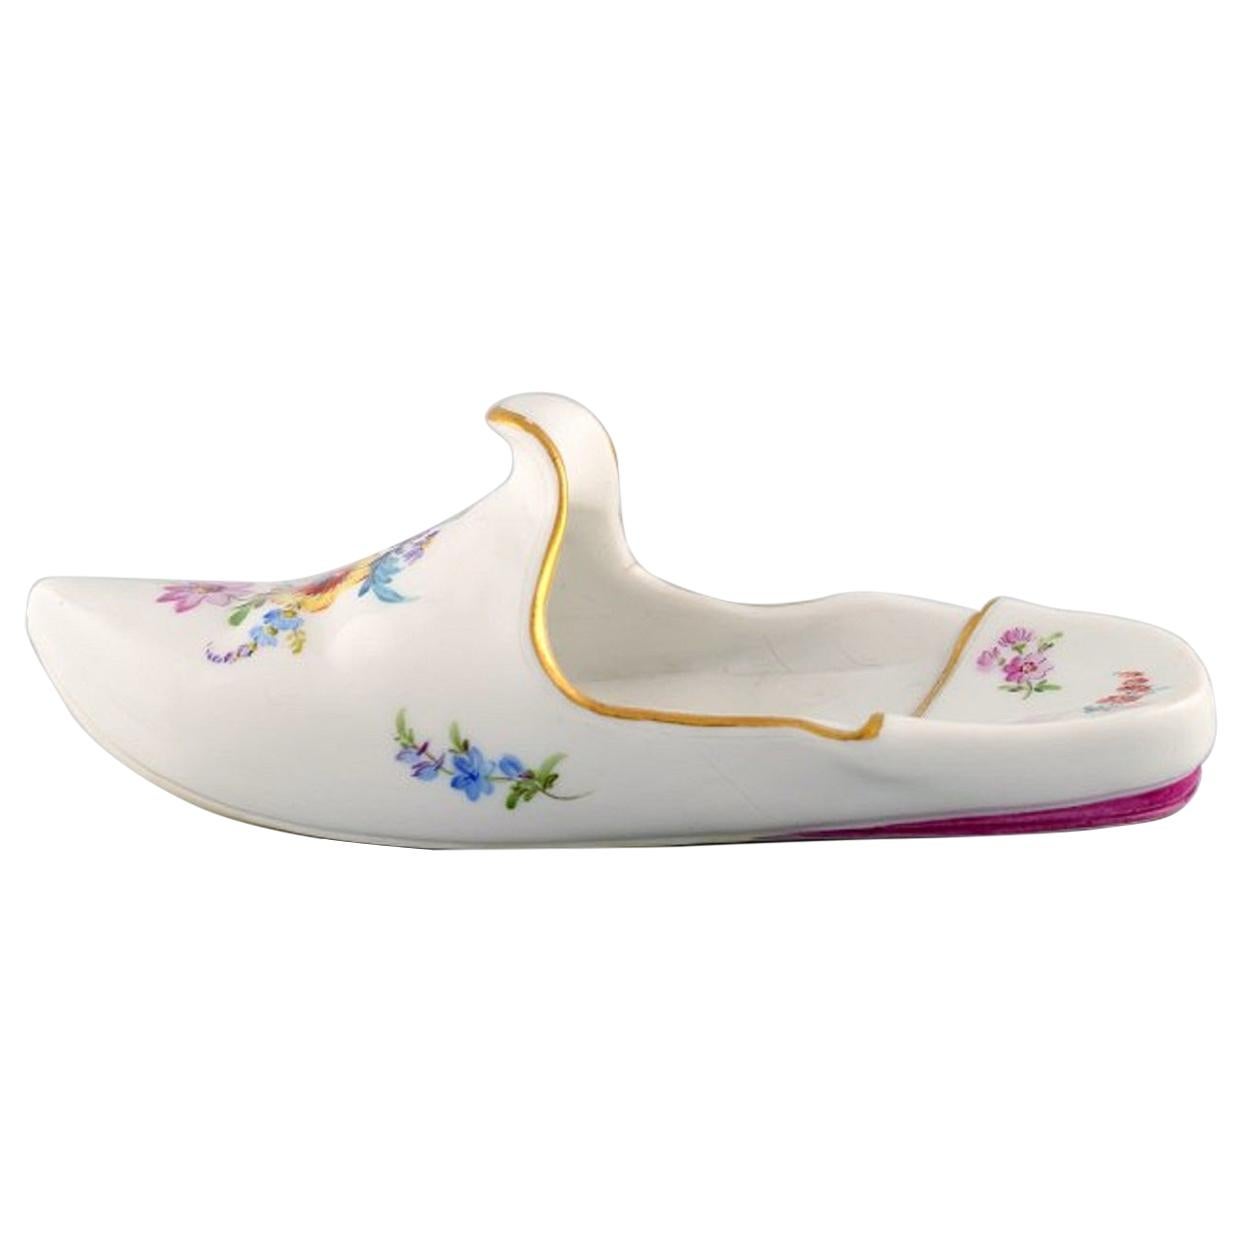 Antik Meissen Slipper in Hand Painted Porcelain with Floral Motifs, 19th Century